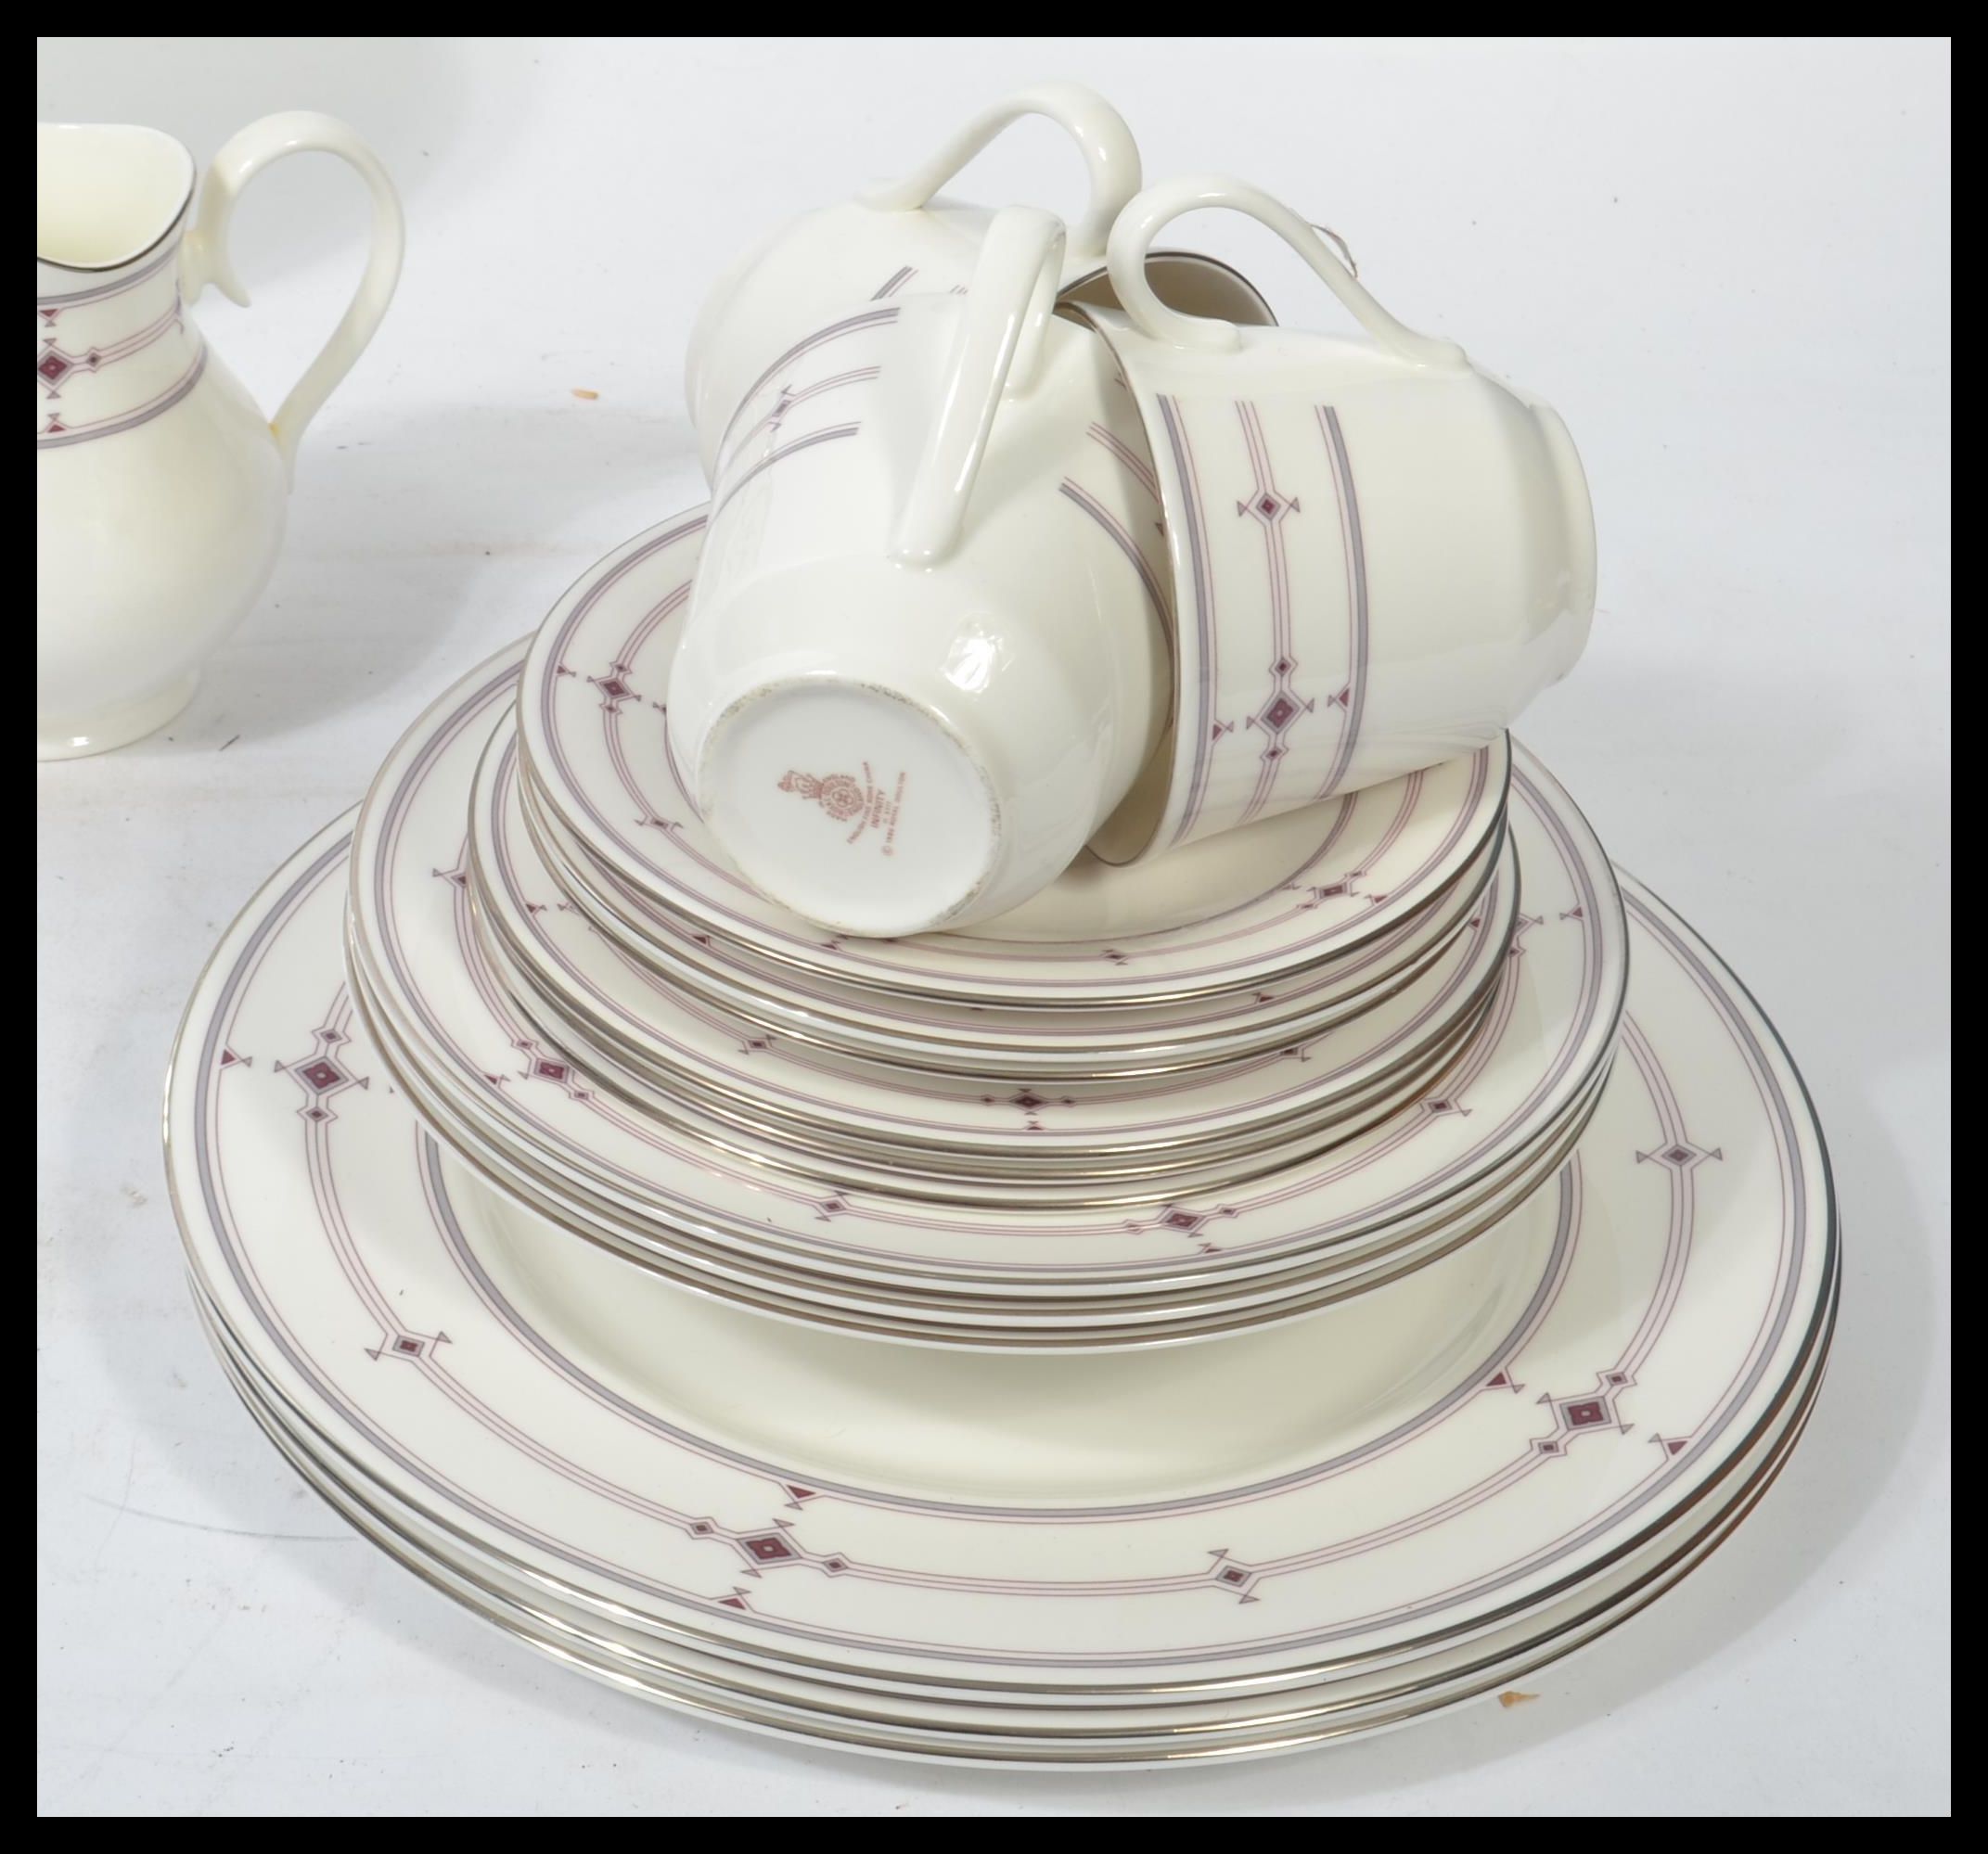 A Royal Doulton tea and dinner service in the Infi - Image 3 of 6